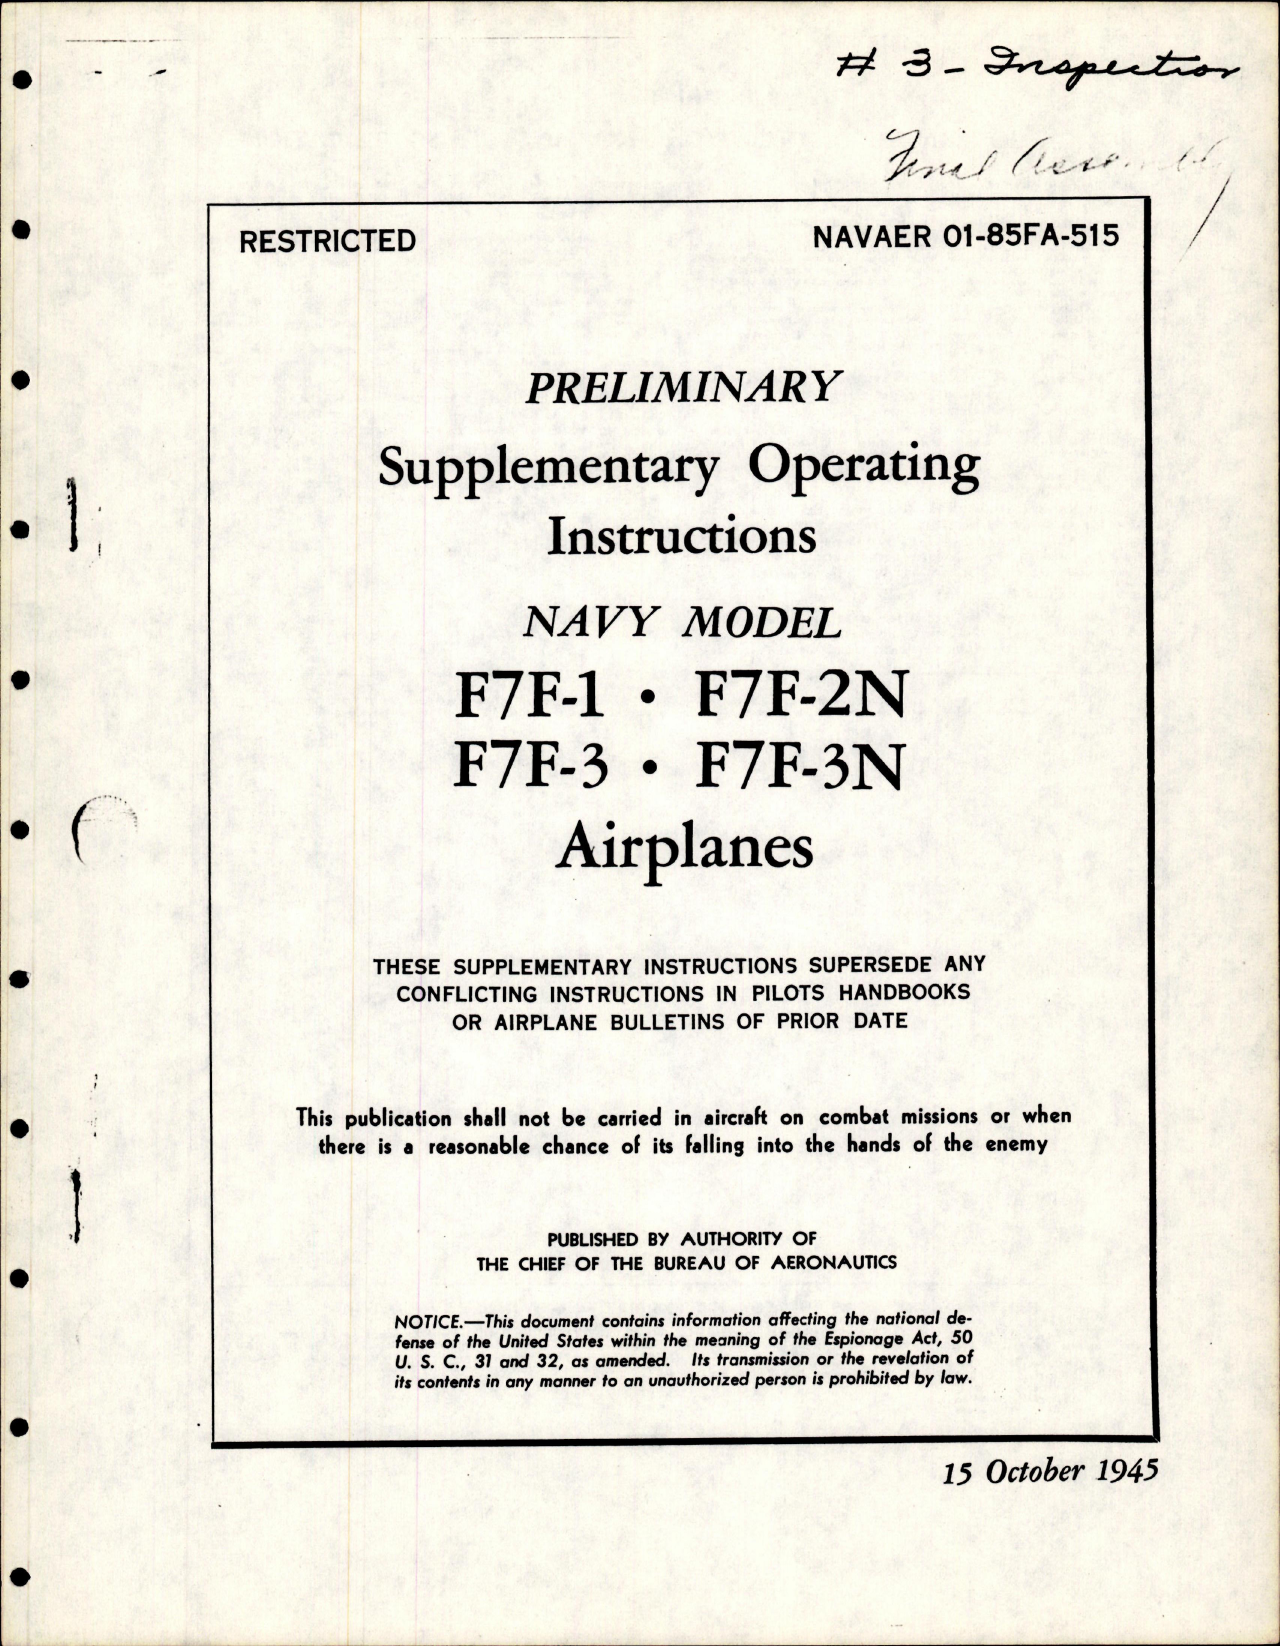 Sample page 1 from AirCorps Library document: Supplementary Operating Instructions for F7F-1N, F7F-2N, F7F-3, and F7F-3N